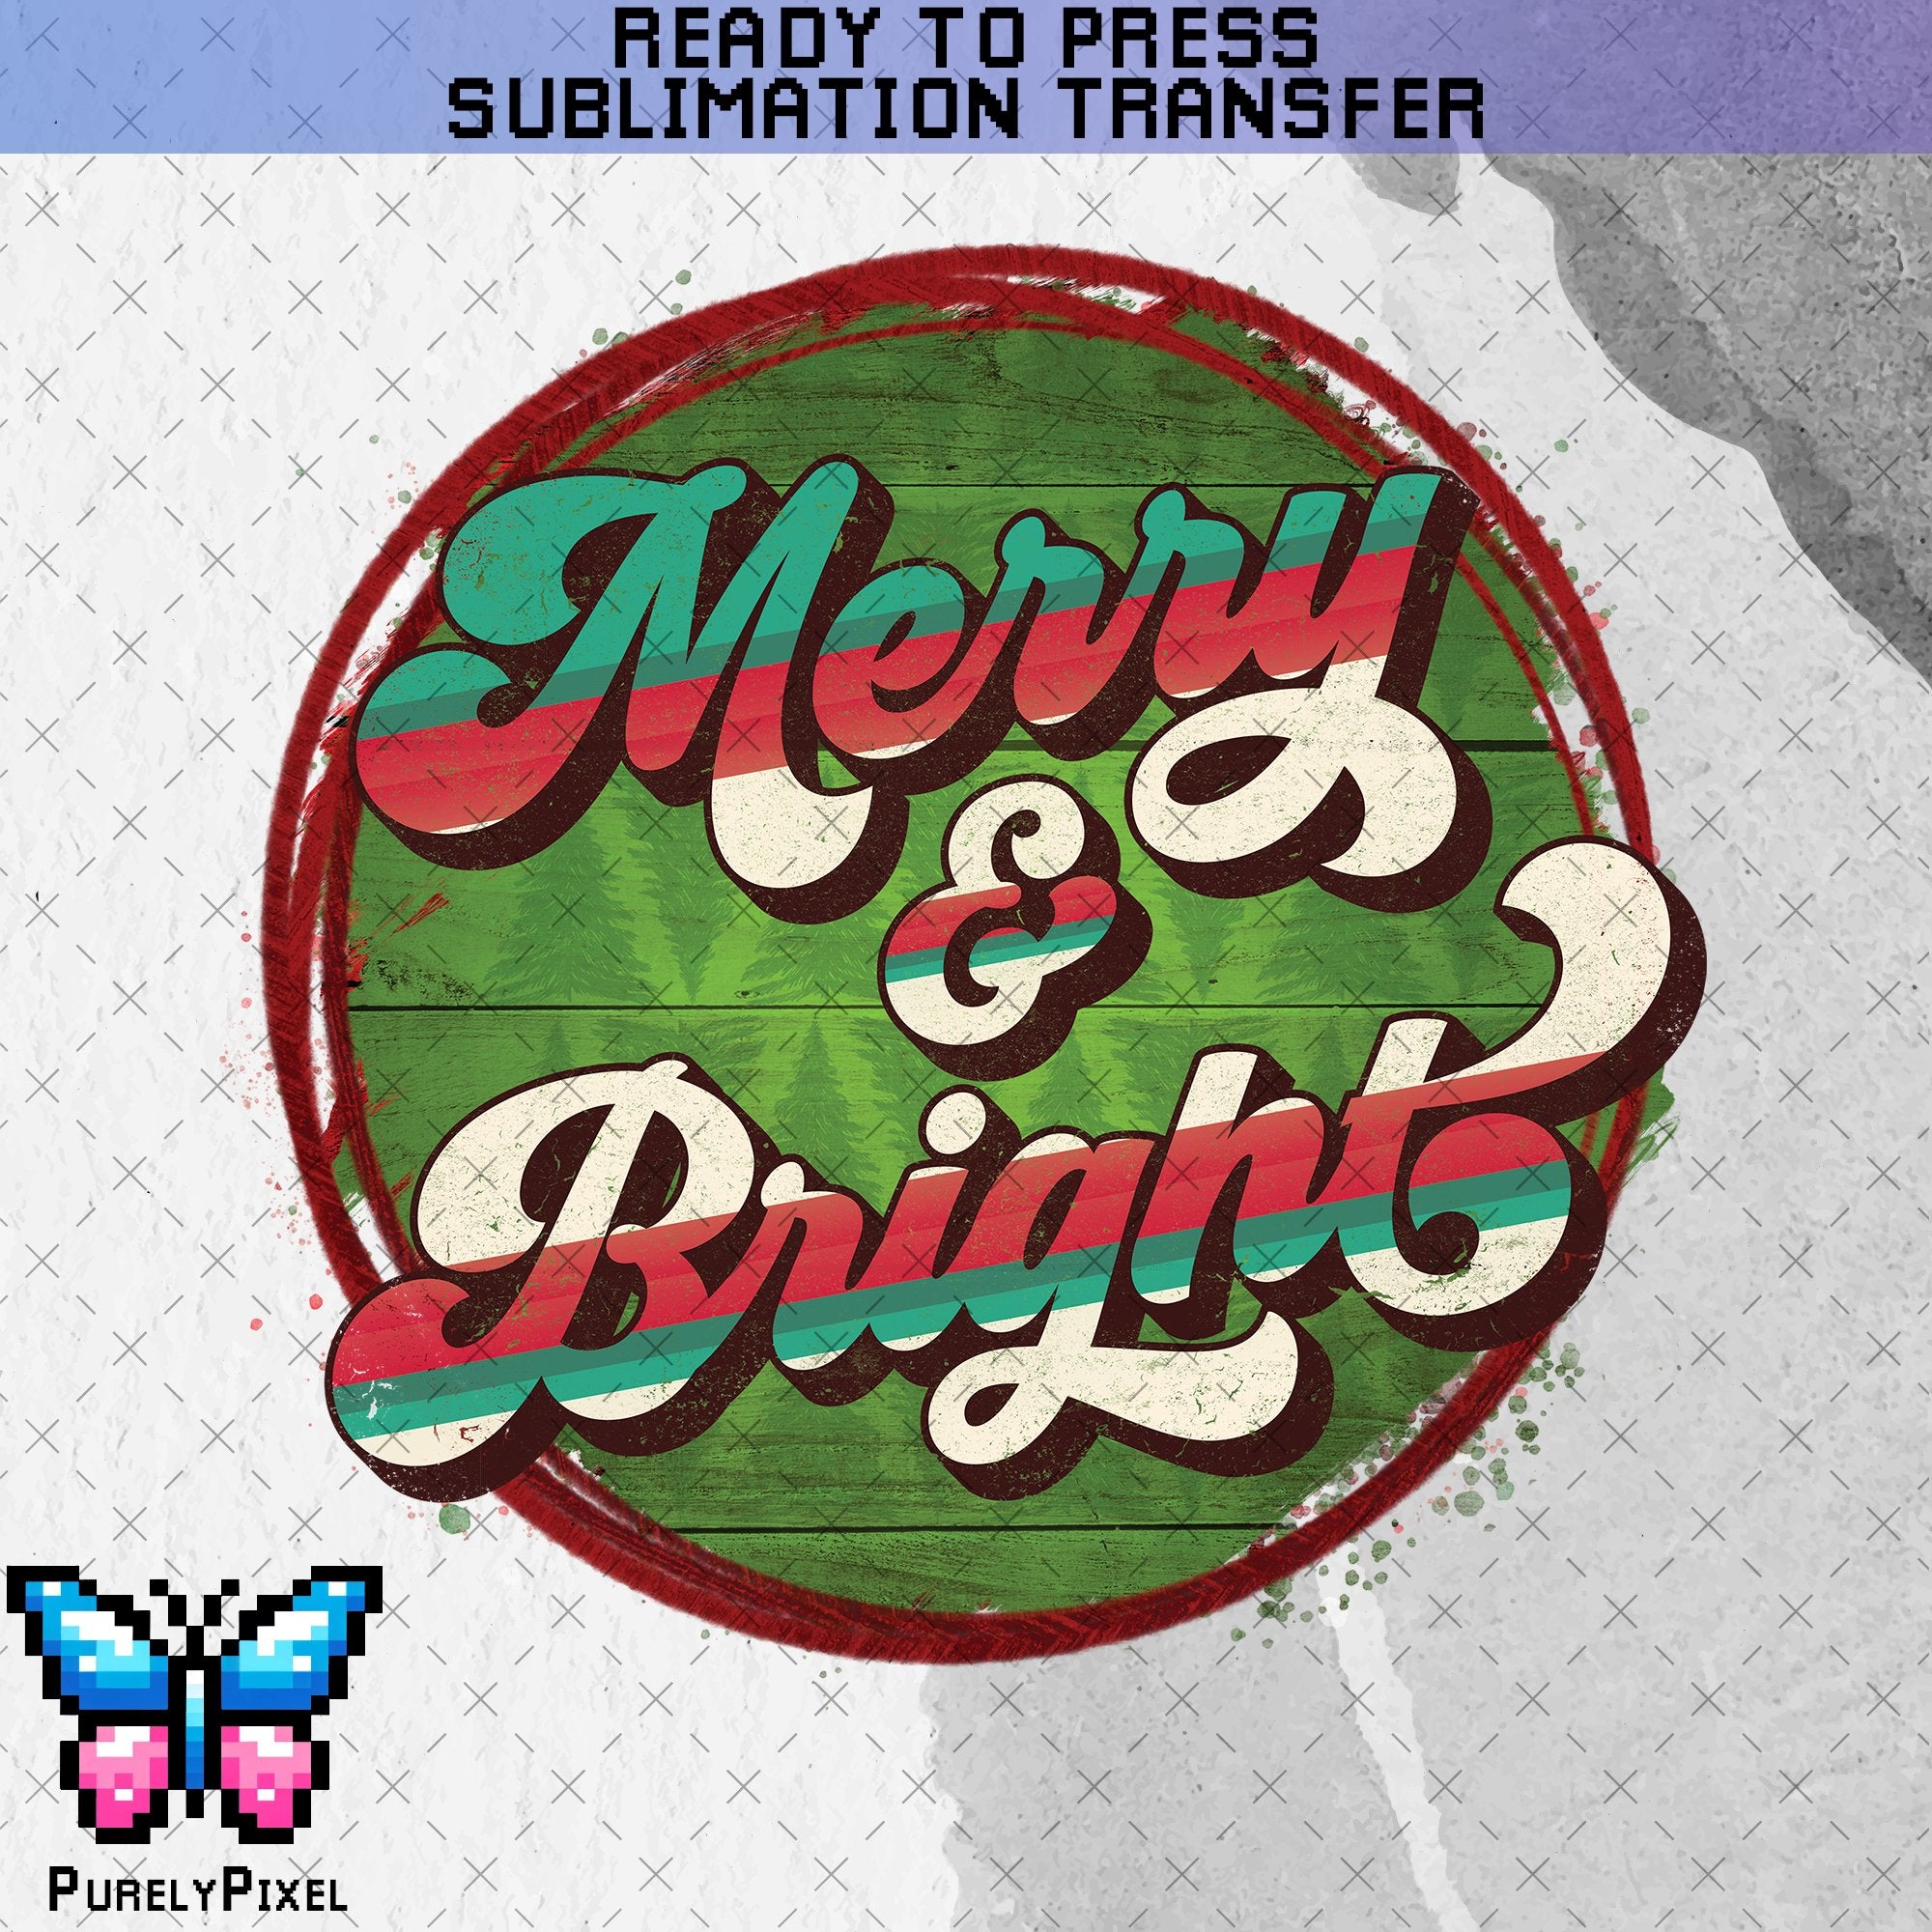 Merry and Bright Christmas Decoration | Christmas Tree Sub | Green Red Winter Holidays | Christmas Sublimation Transfer Ready to Press | PurelyPixels | Sublimation Transfers